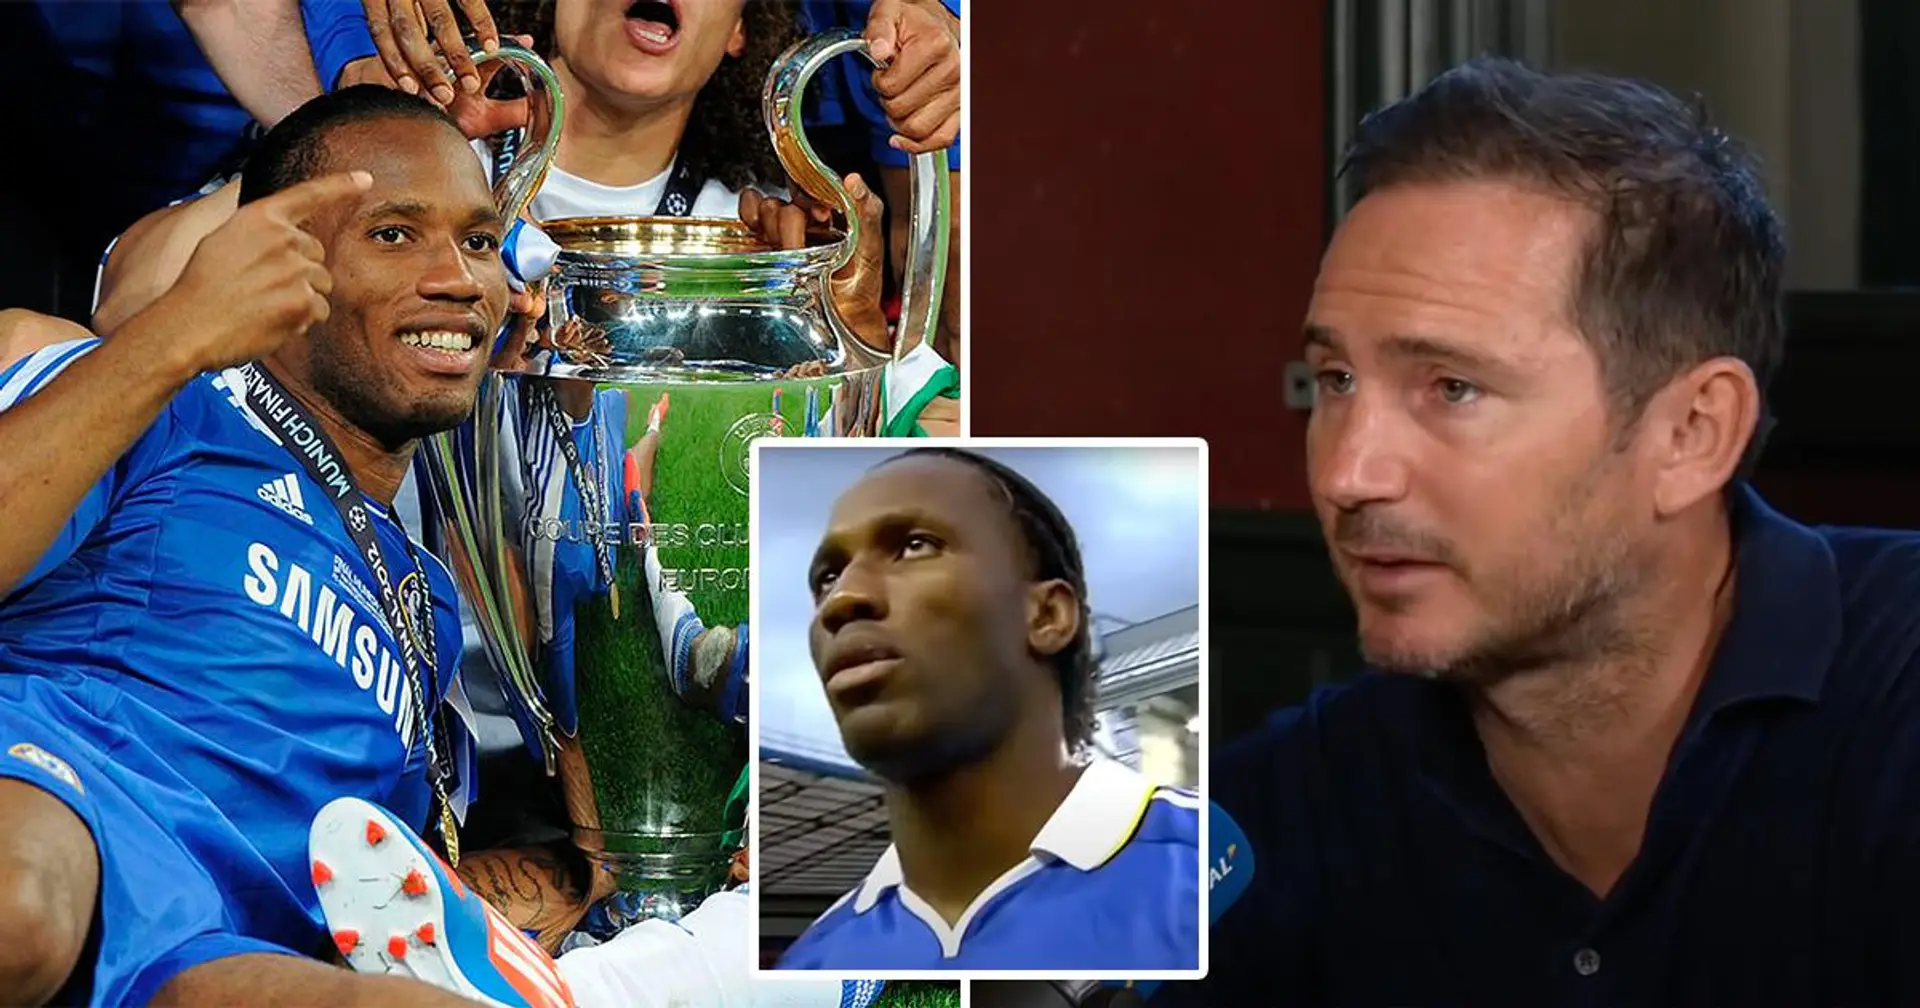 "He was headbutting walls before Champions League final": Lampard tells about Drogba's warming-up routine